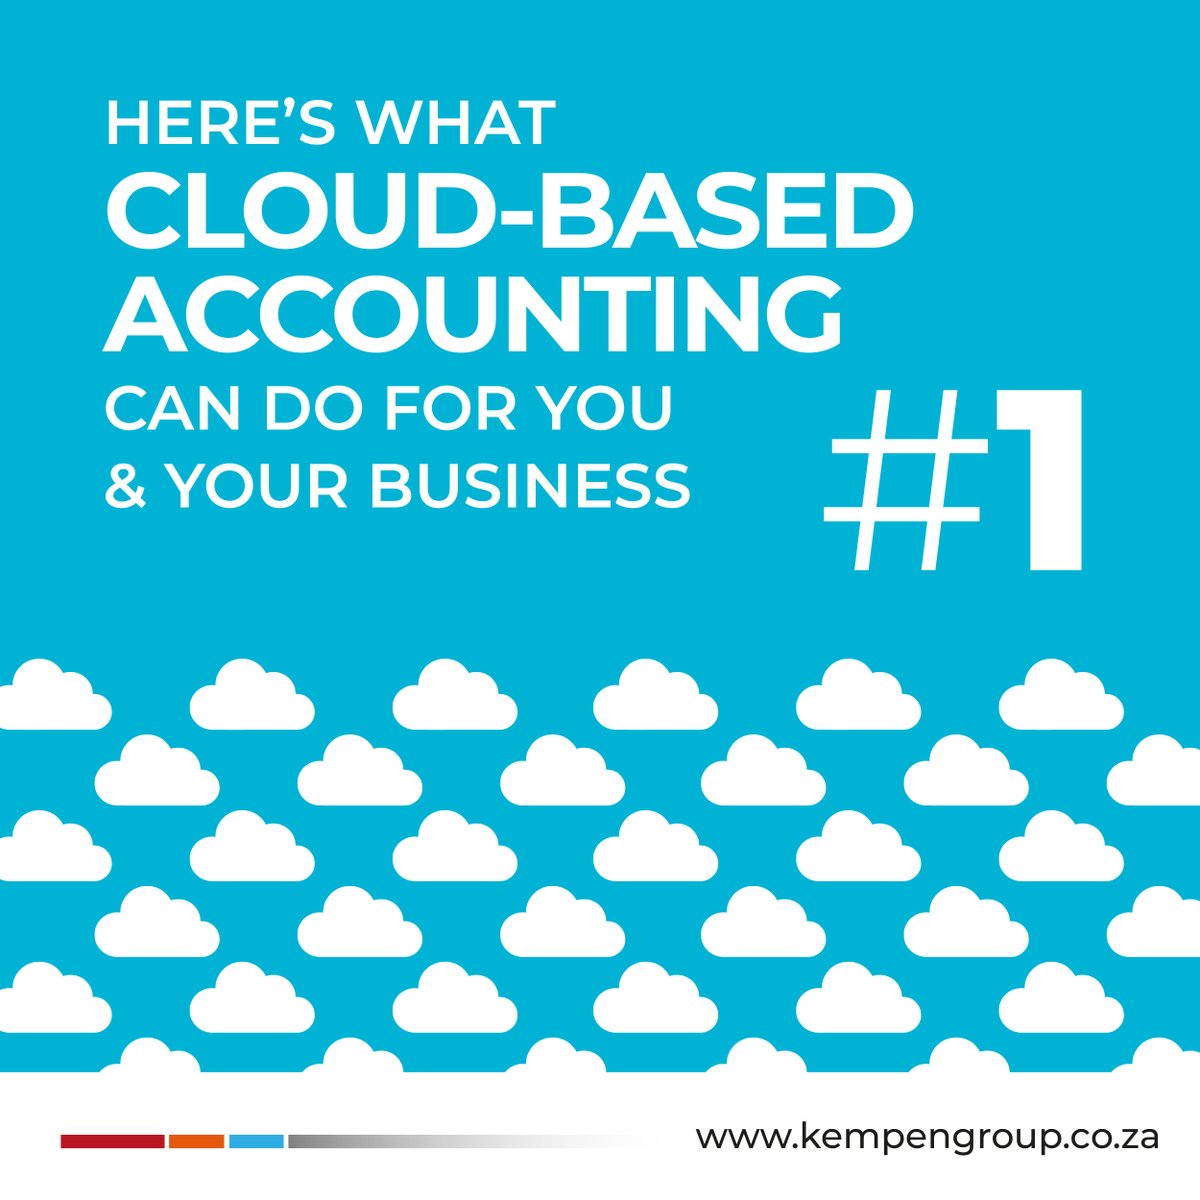 Aren’t you ready to say goodbye to paperwork & hello to #cloudbasedaccounting? With it, you can access your financial data anytime, anywhere & collaborate with your team seamlessly.

We can show you the ropes.
📱082 940 6700
📧ignus@kempengroup.co.za

#KempenOnline #KempenGroup